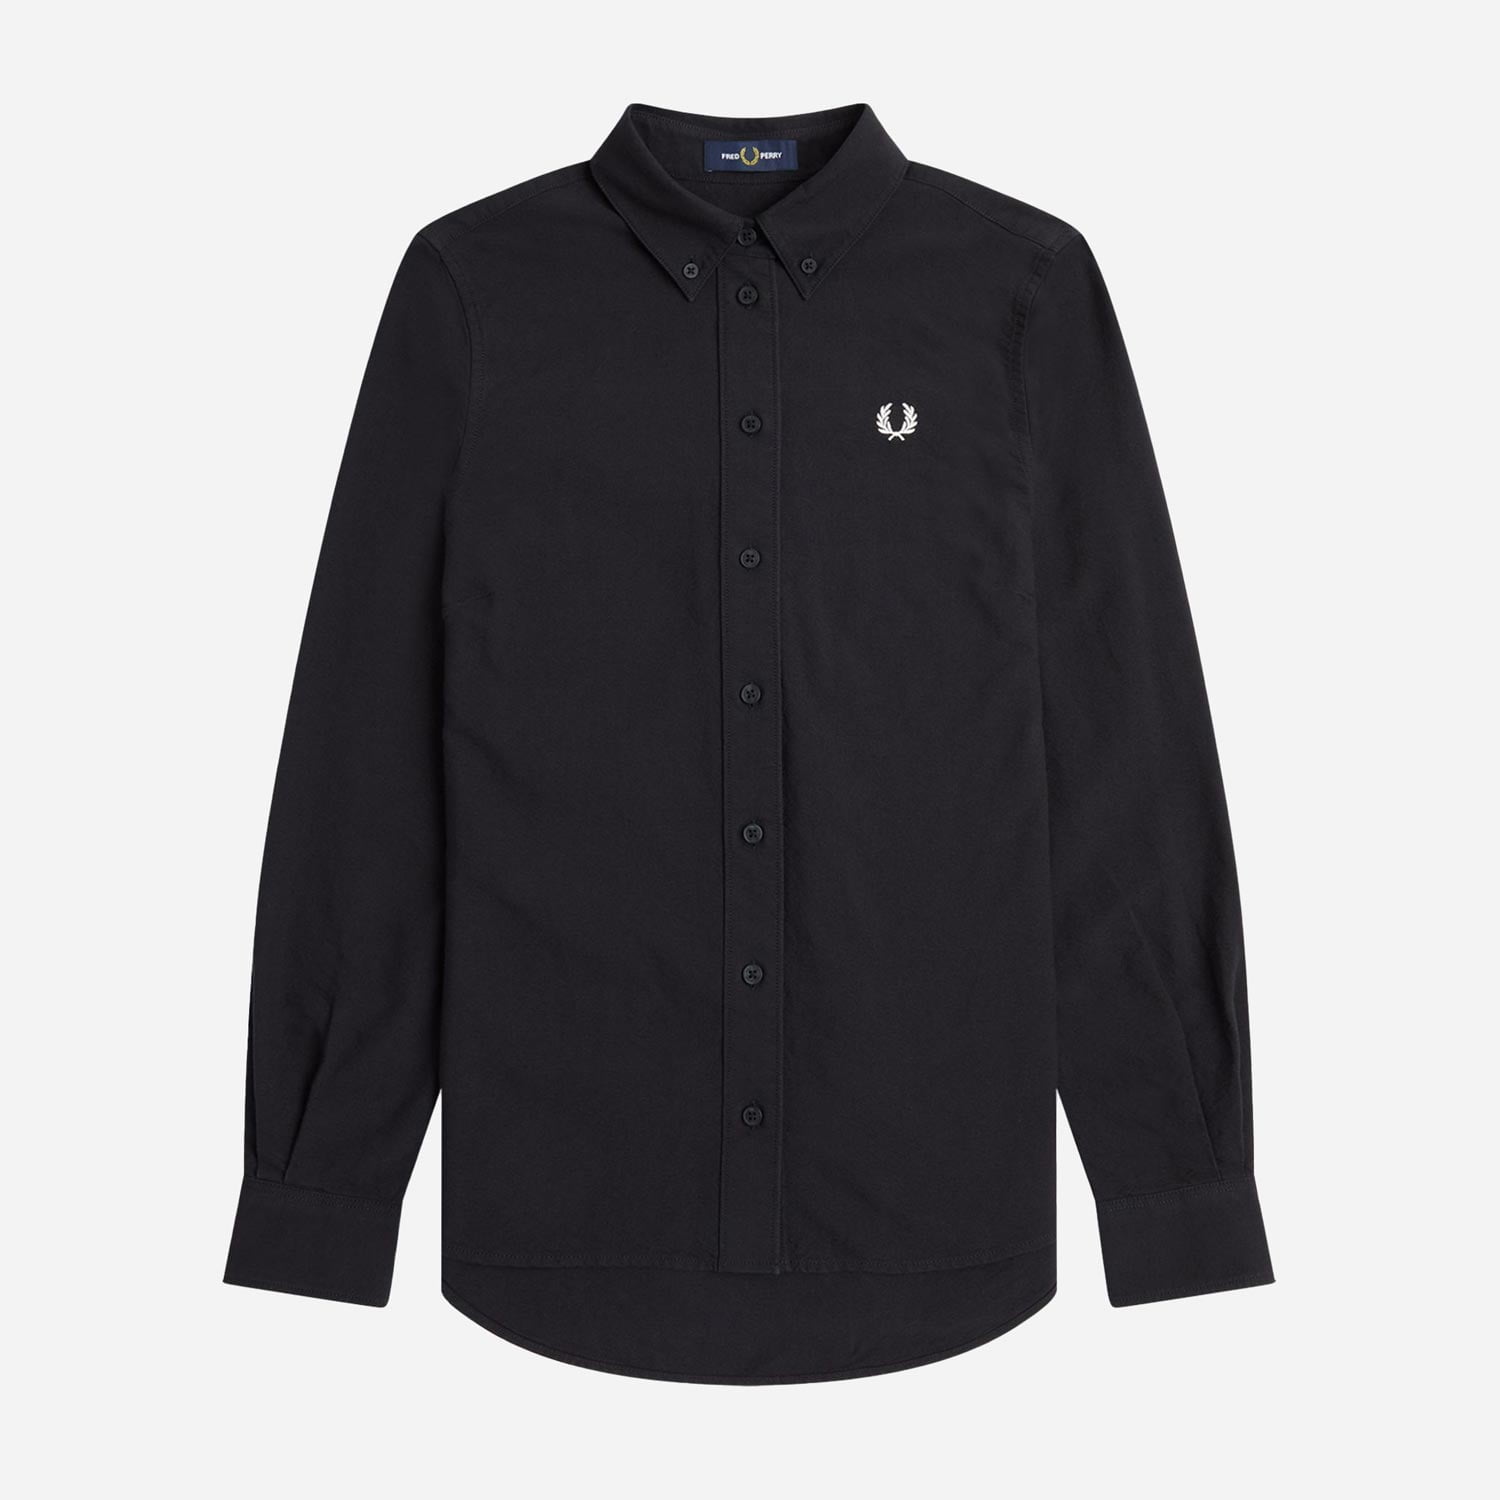 Fred Perry Women's Button Down Shirt - Black